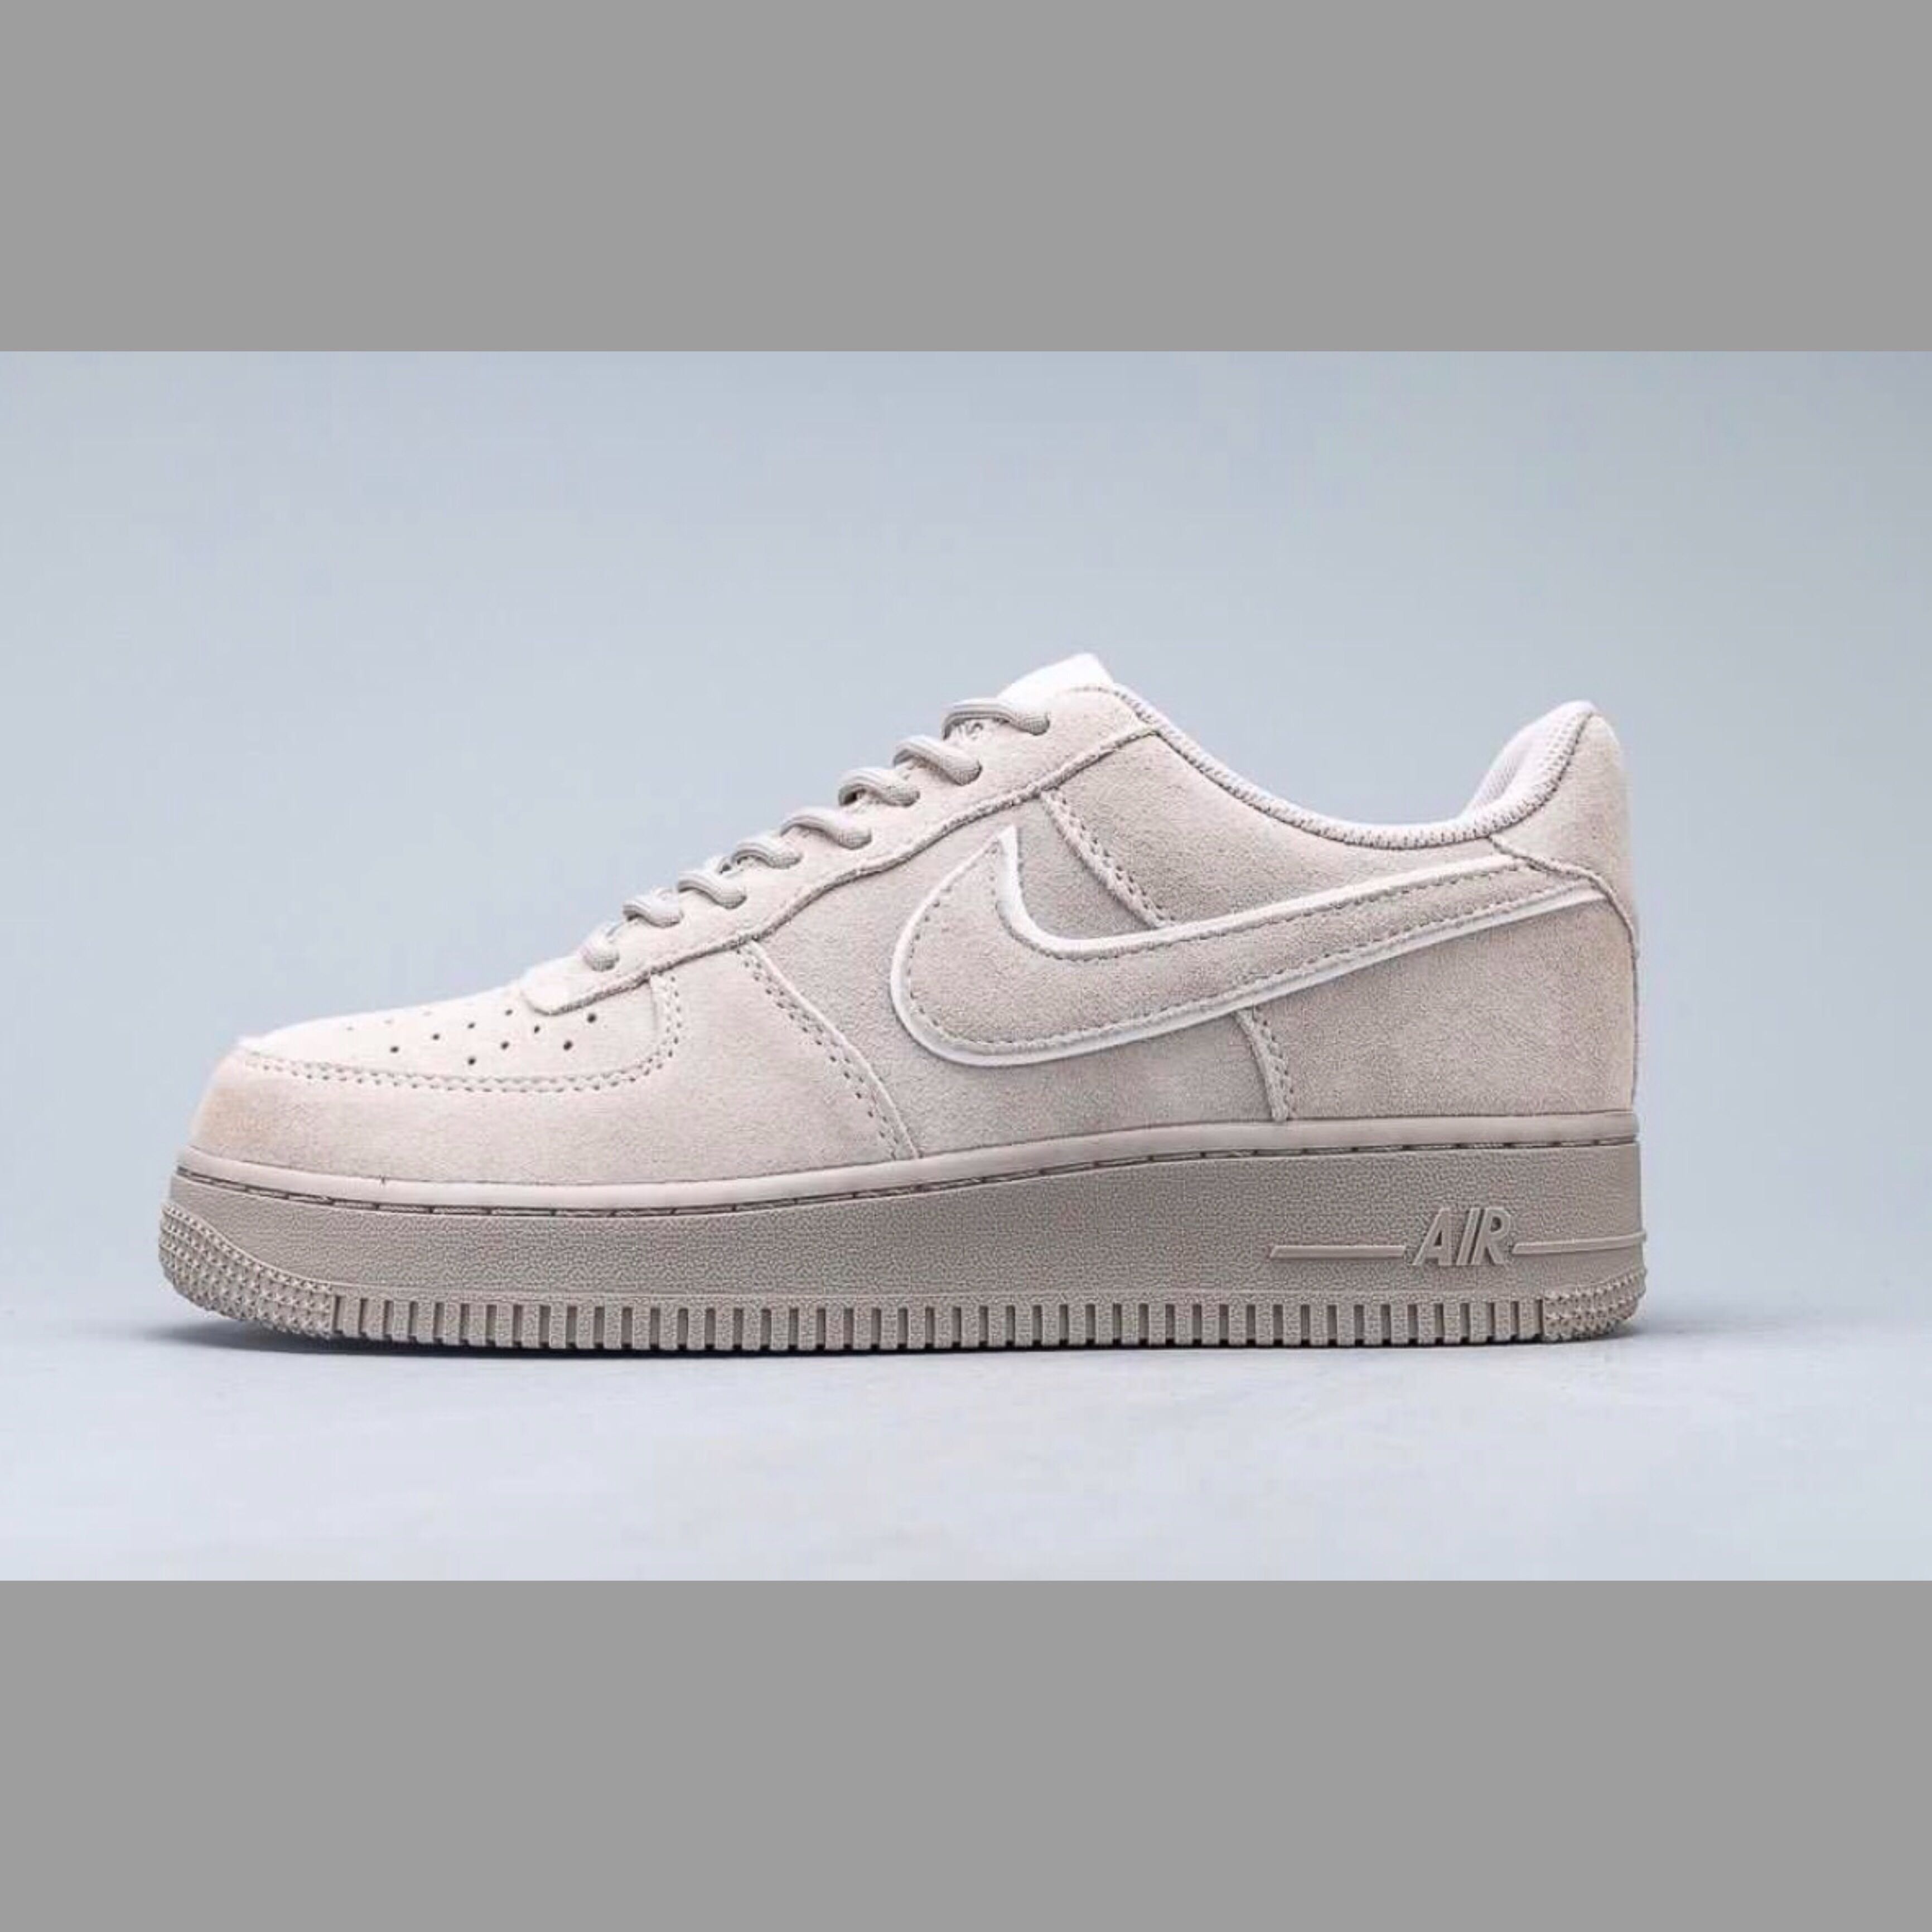 🔥🔥 NEW NIKE AIR FORCE 1 '07 LV8 SE GREY REFLECTIVE SUEDE MENS SIZING 🔥🔥